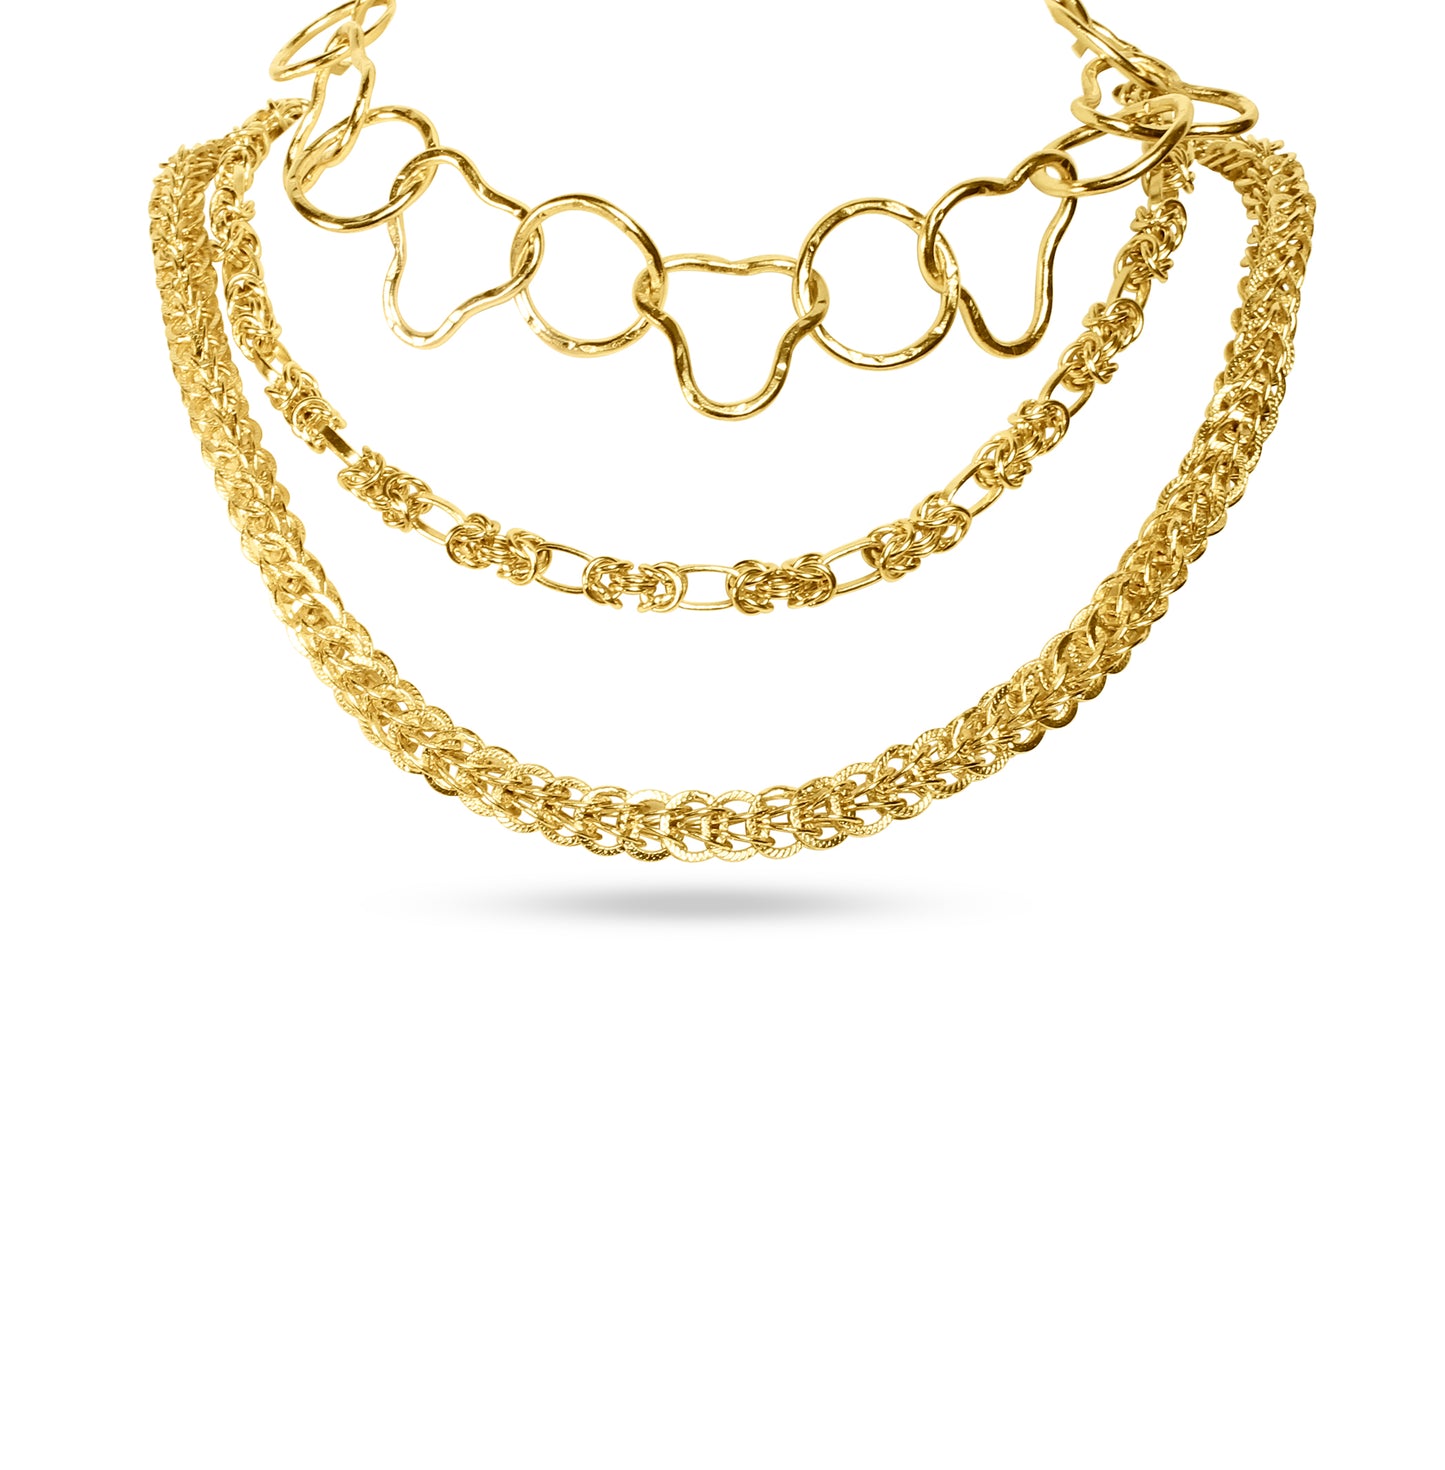 DOUBLE-LINK GOLD CHAIN